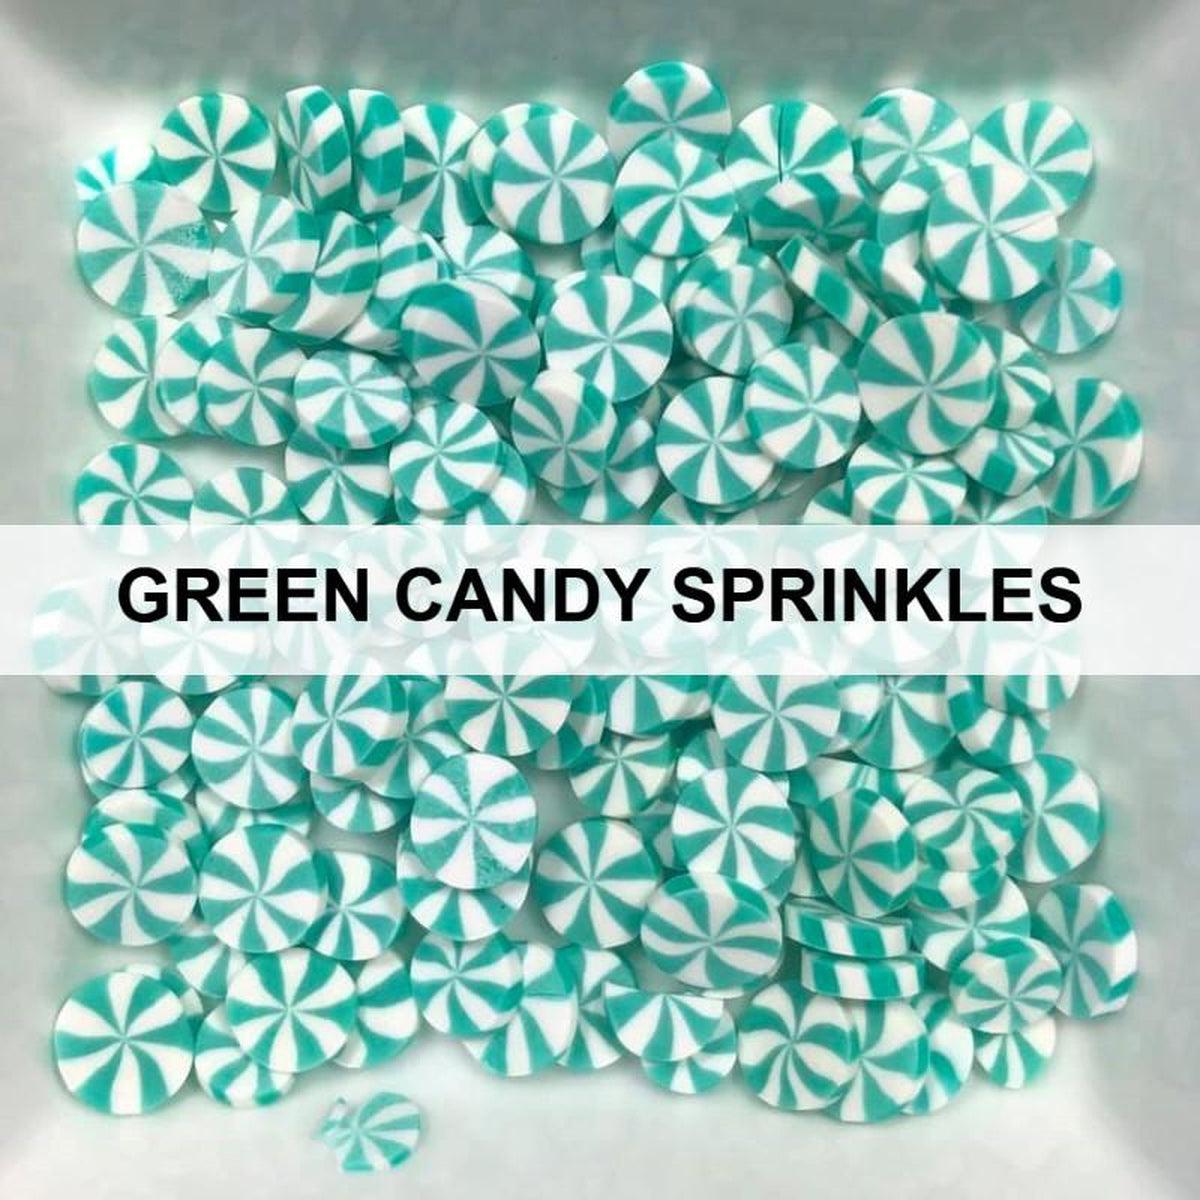 Green Candy Sprinkles by Kat Scrappiness - Kat Scrappiness